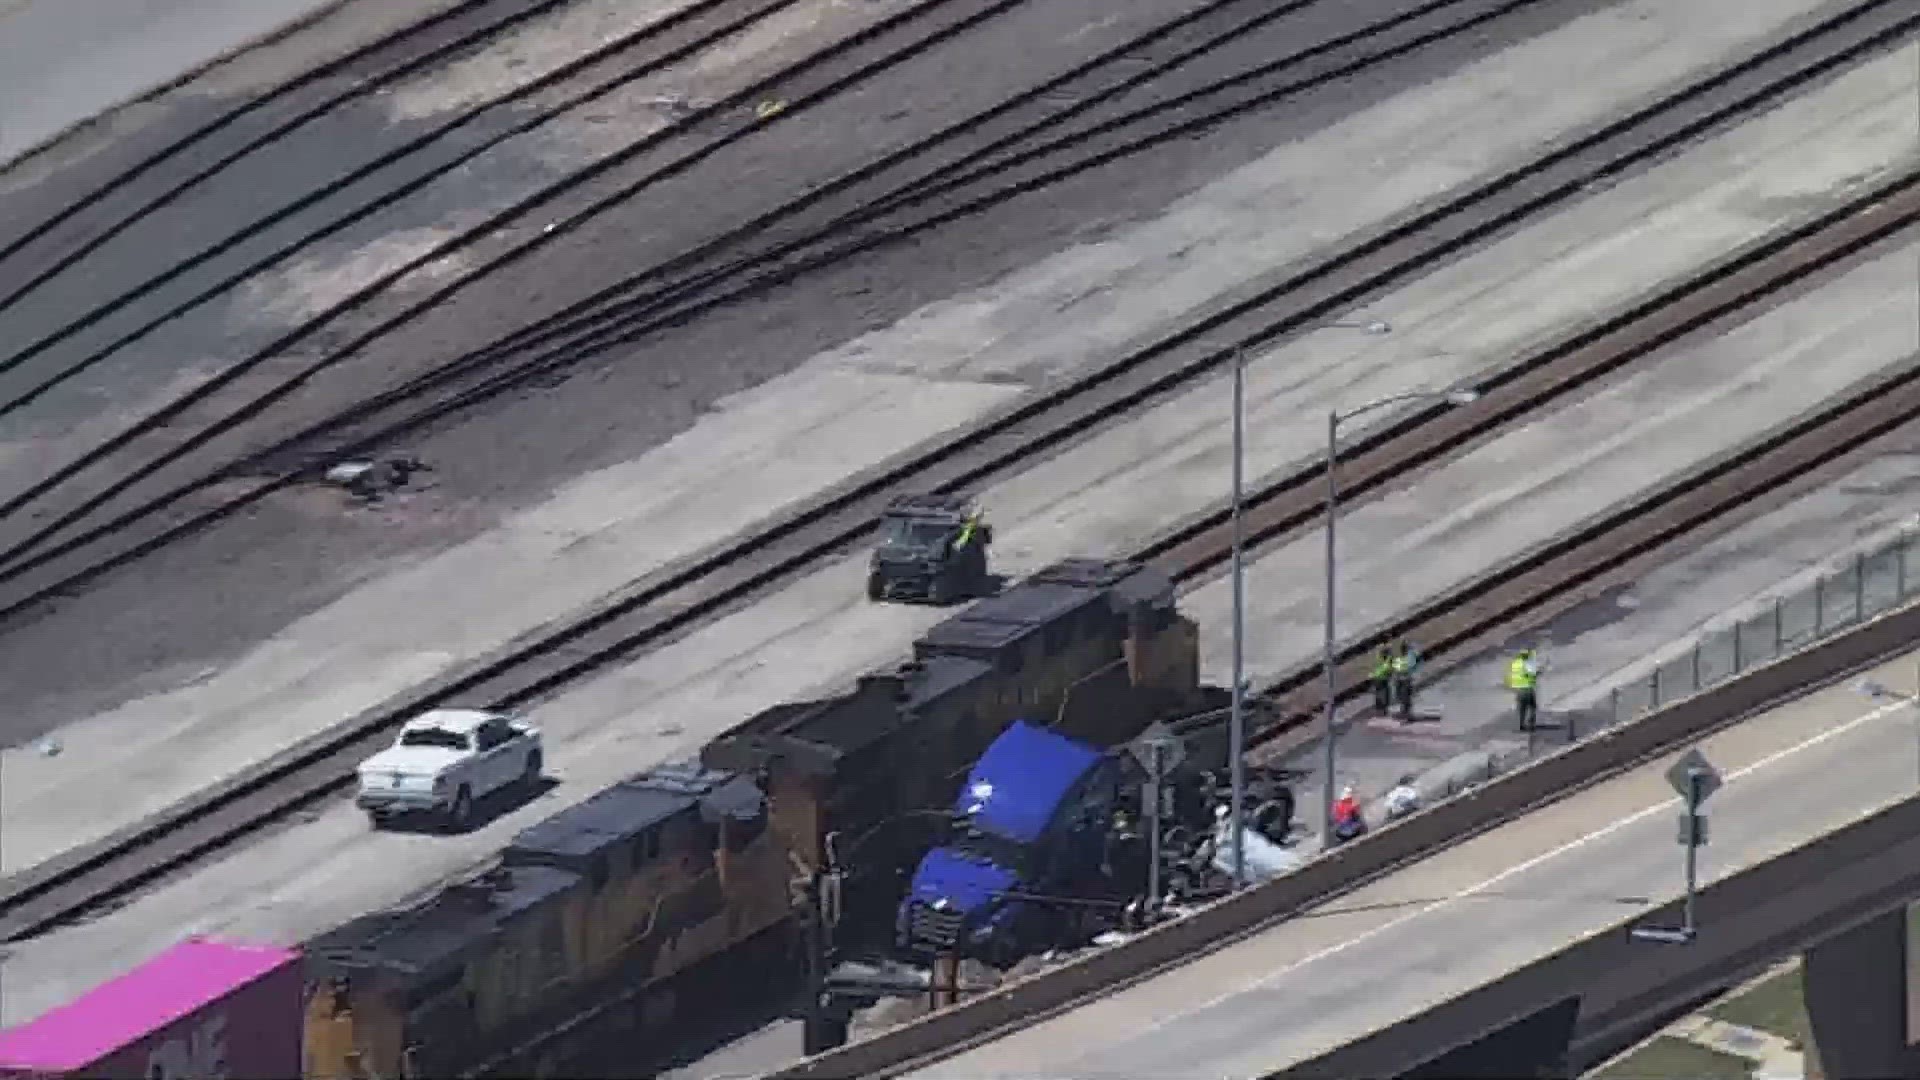 There was a major accident between a train and an 18-wheeler in Fort Worth on Friday.